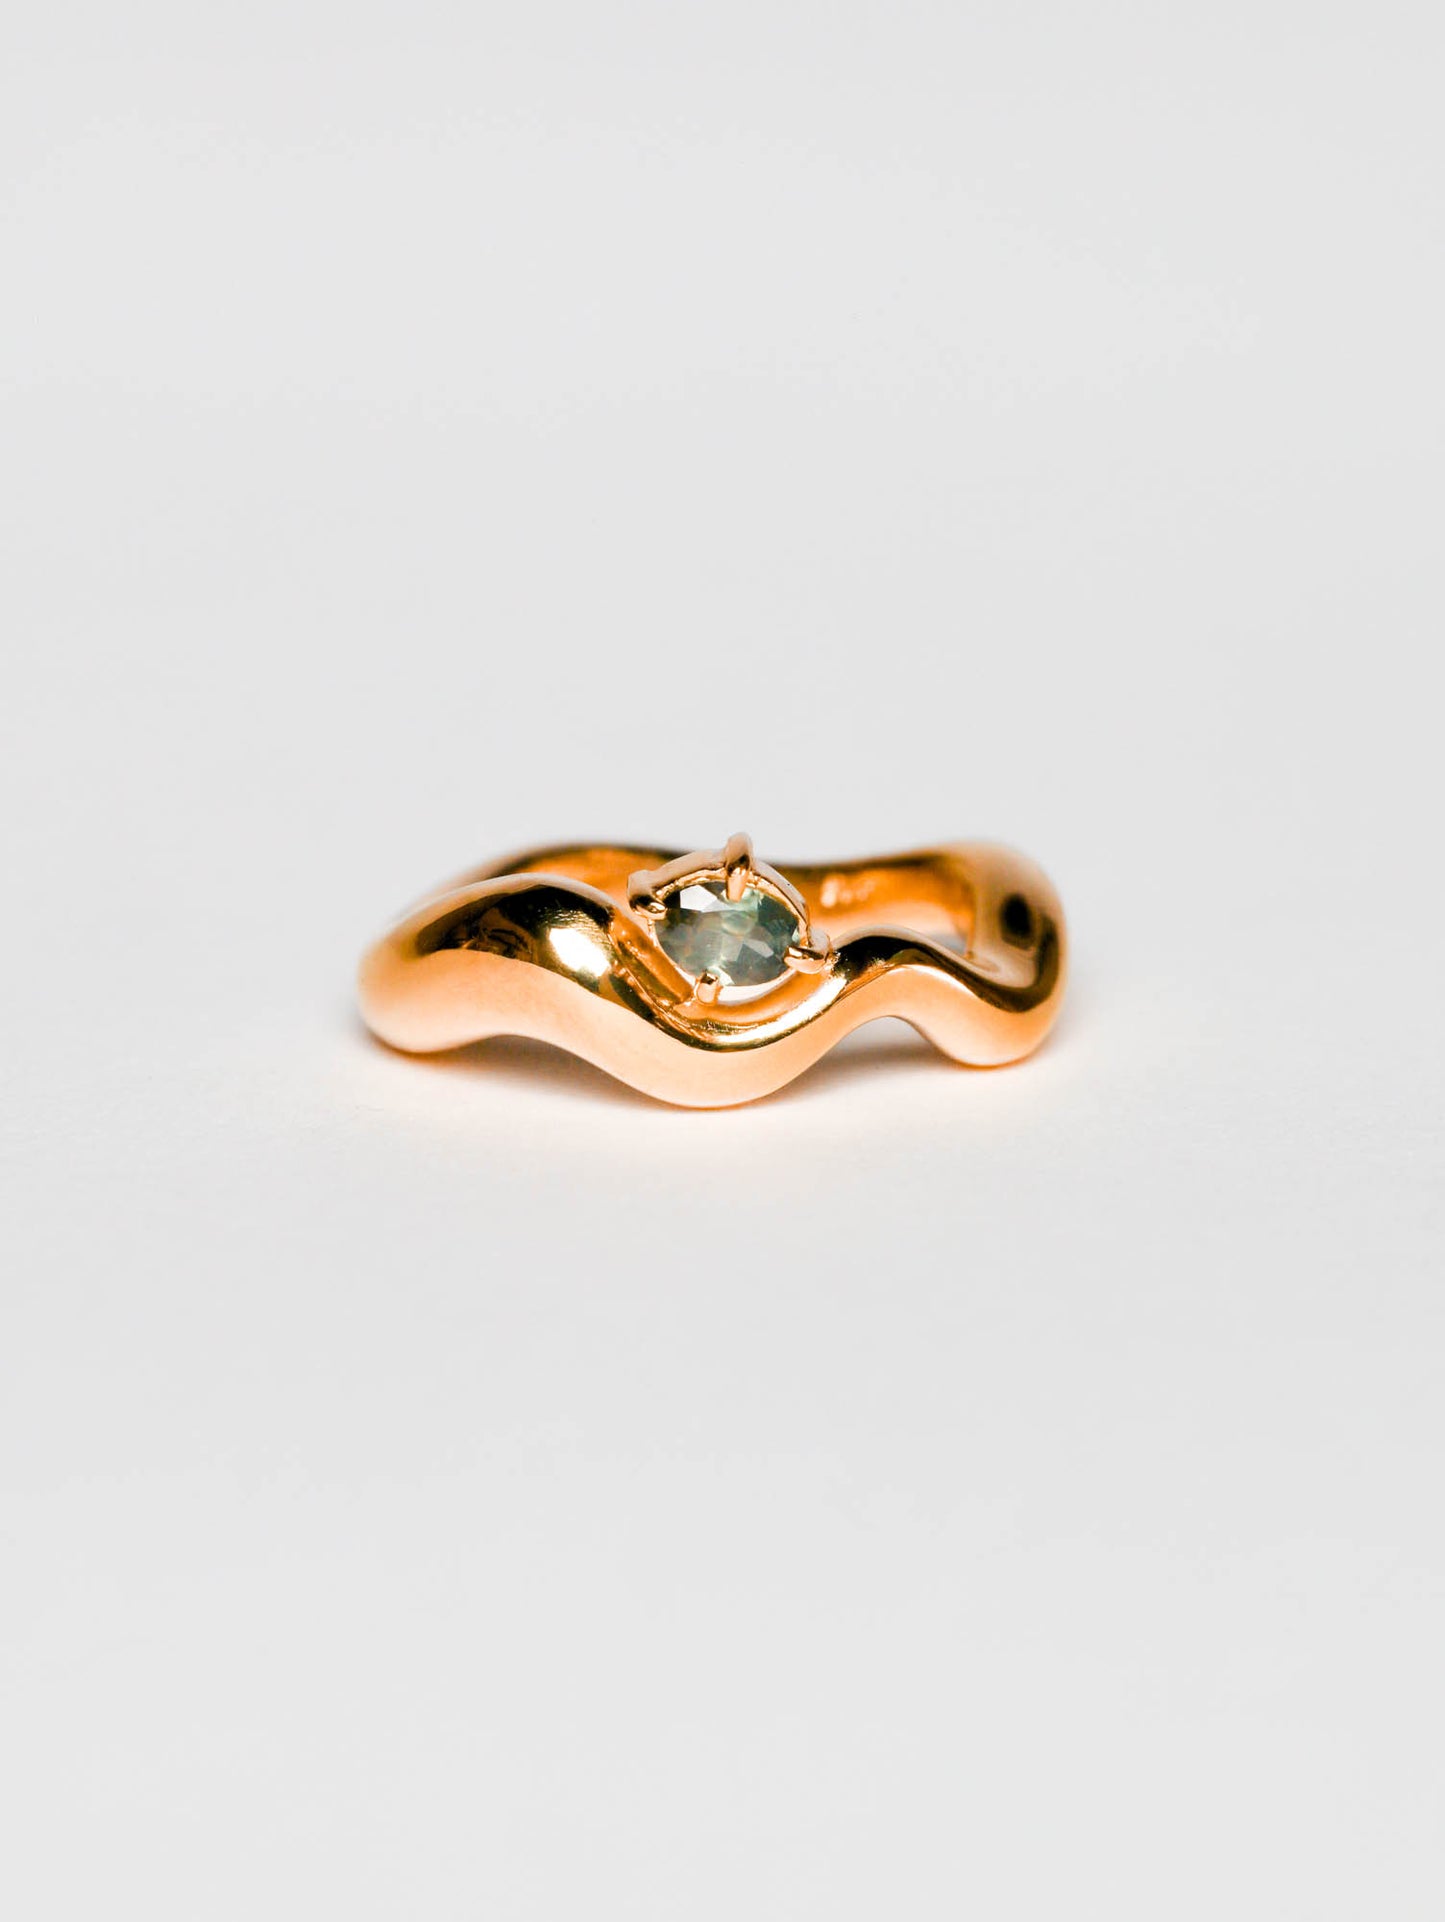 Wave Ring Gold with single Tourmaline Stone # 5 | Size 7.5